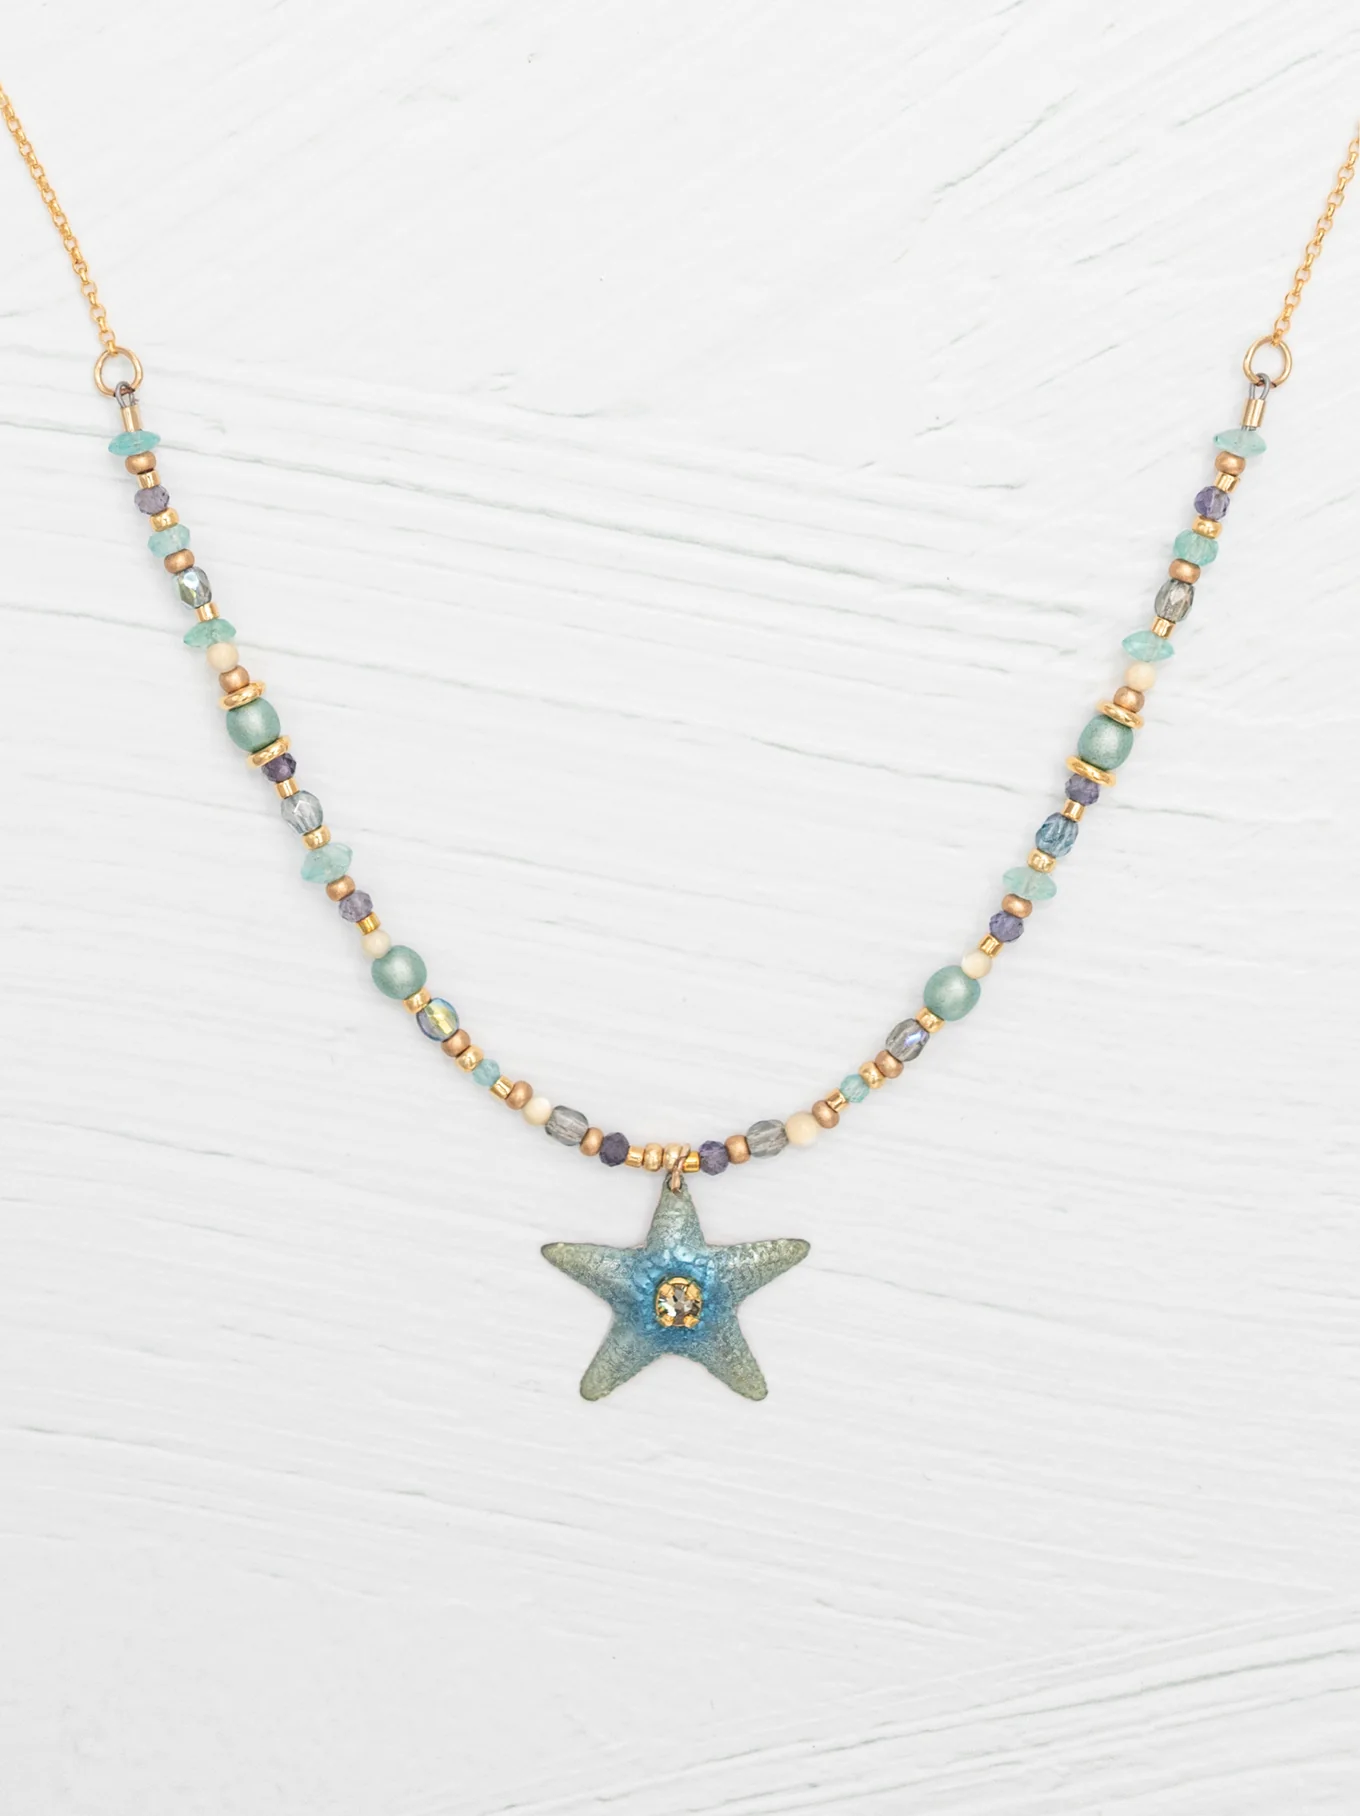 Starfish necklace by Holly Yashi